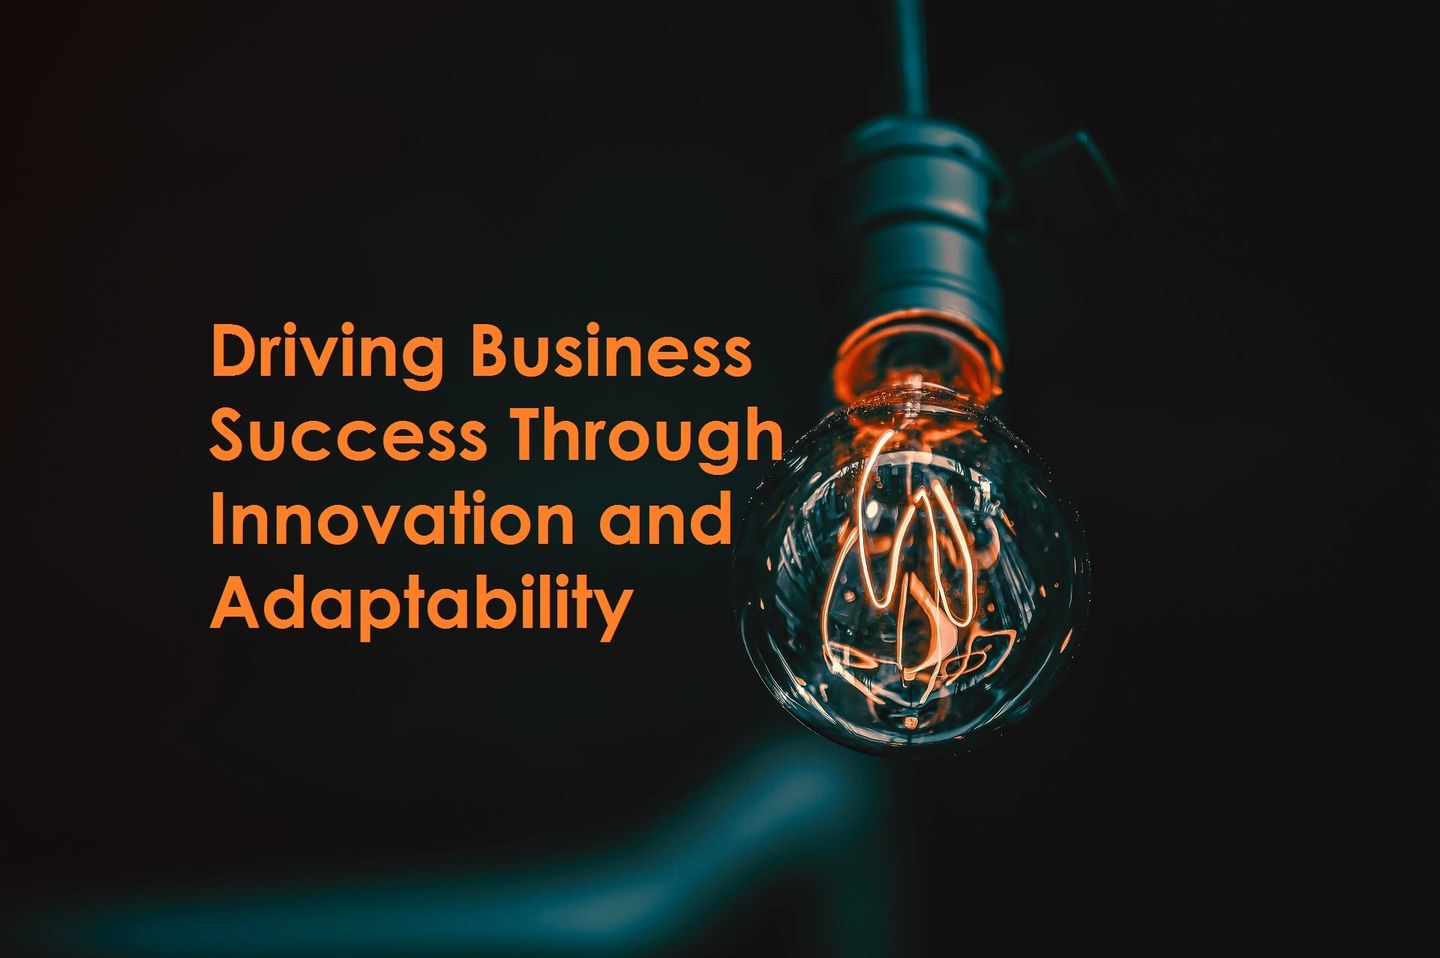 Driving Business Success Through Innovation and Adaptability